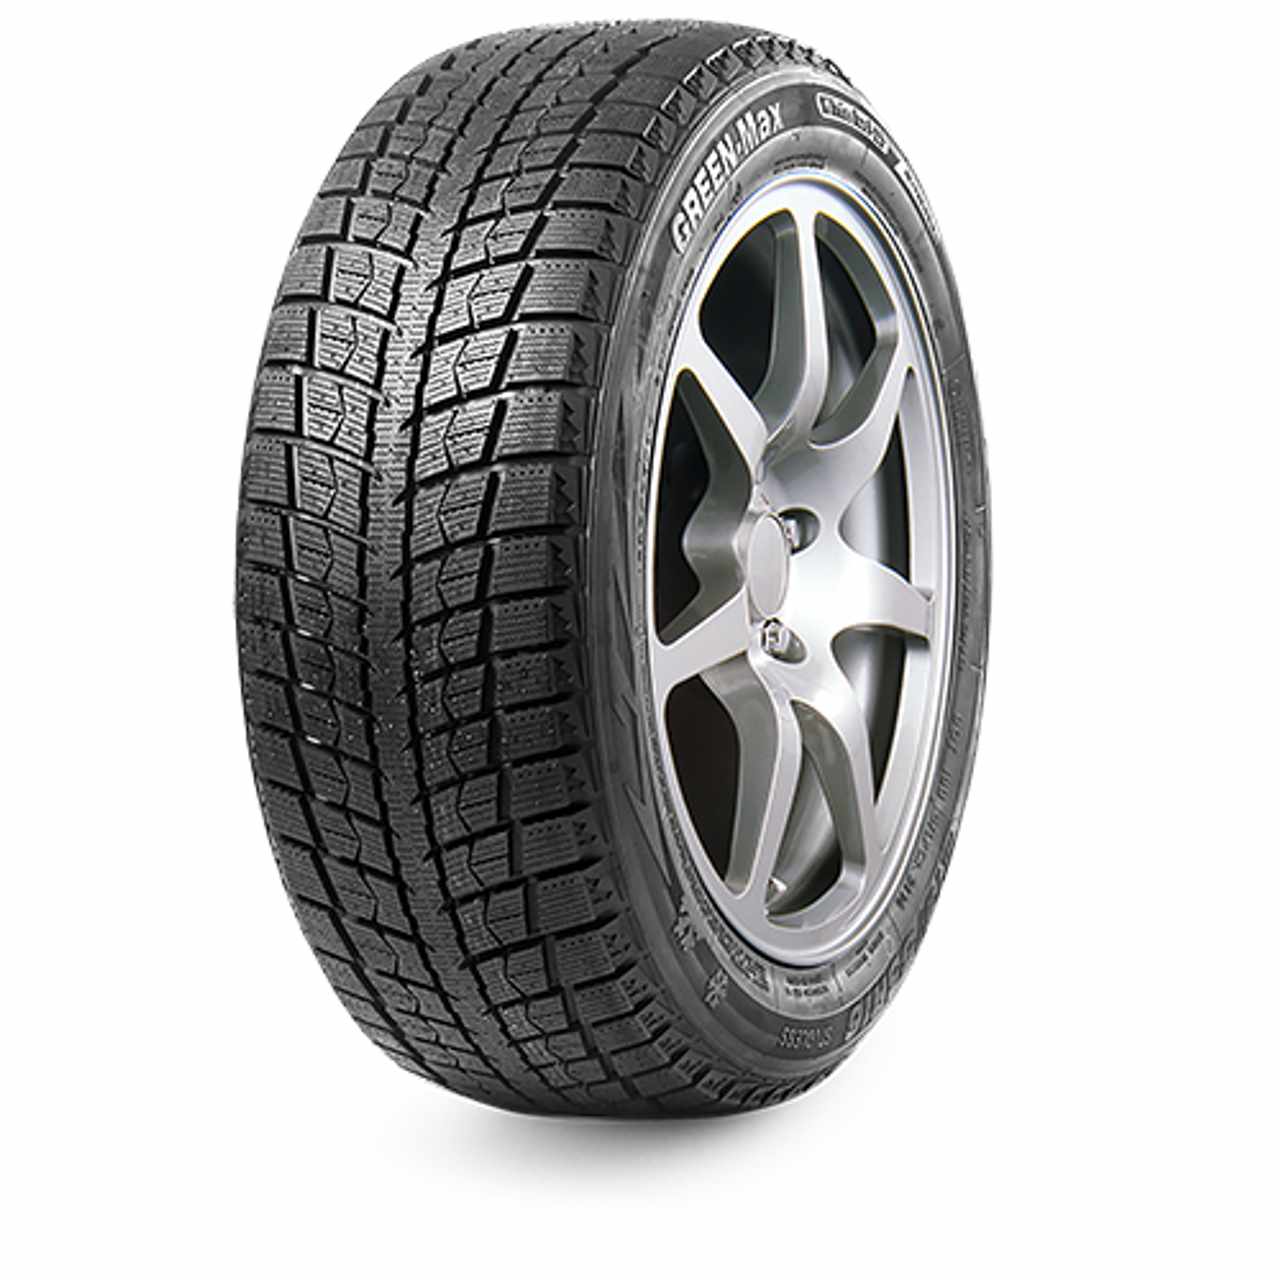 LINGLONG GREEN-MAX WINTER ICE I-15 SUV 285/35R20 100T NORDIC COMPOUND MFS BSW